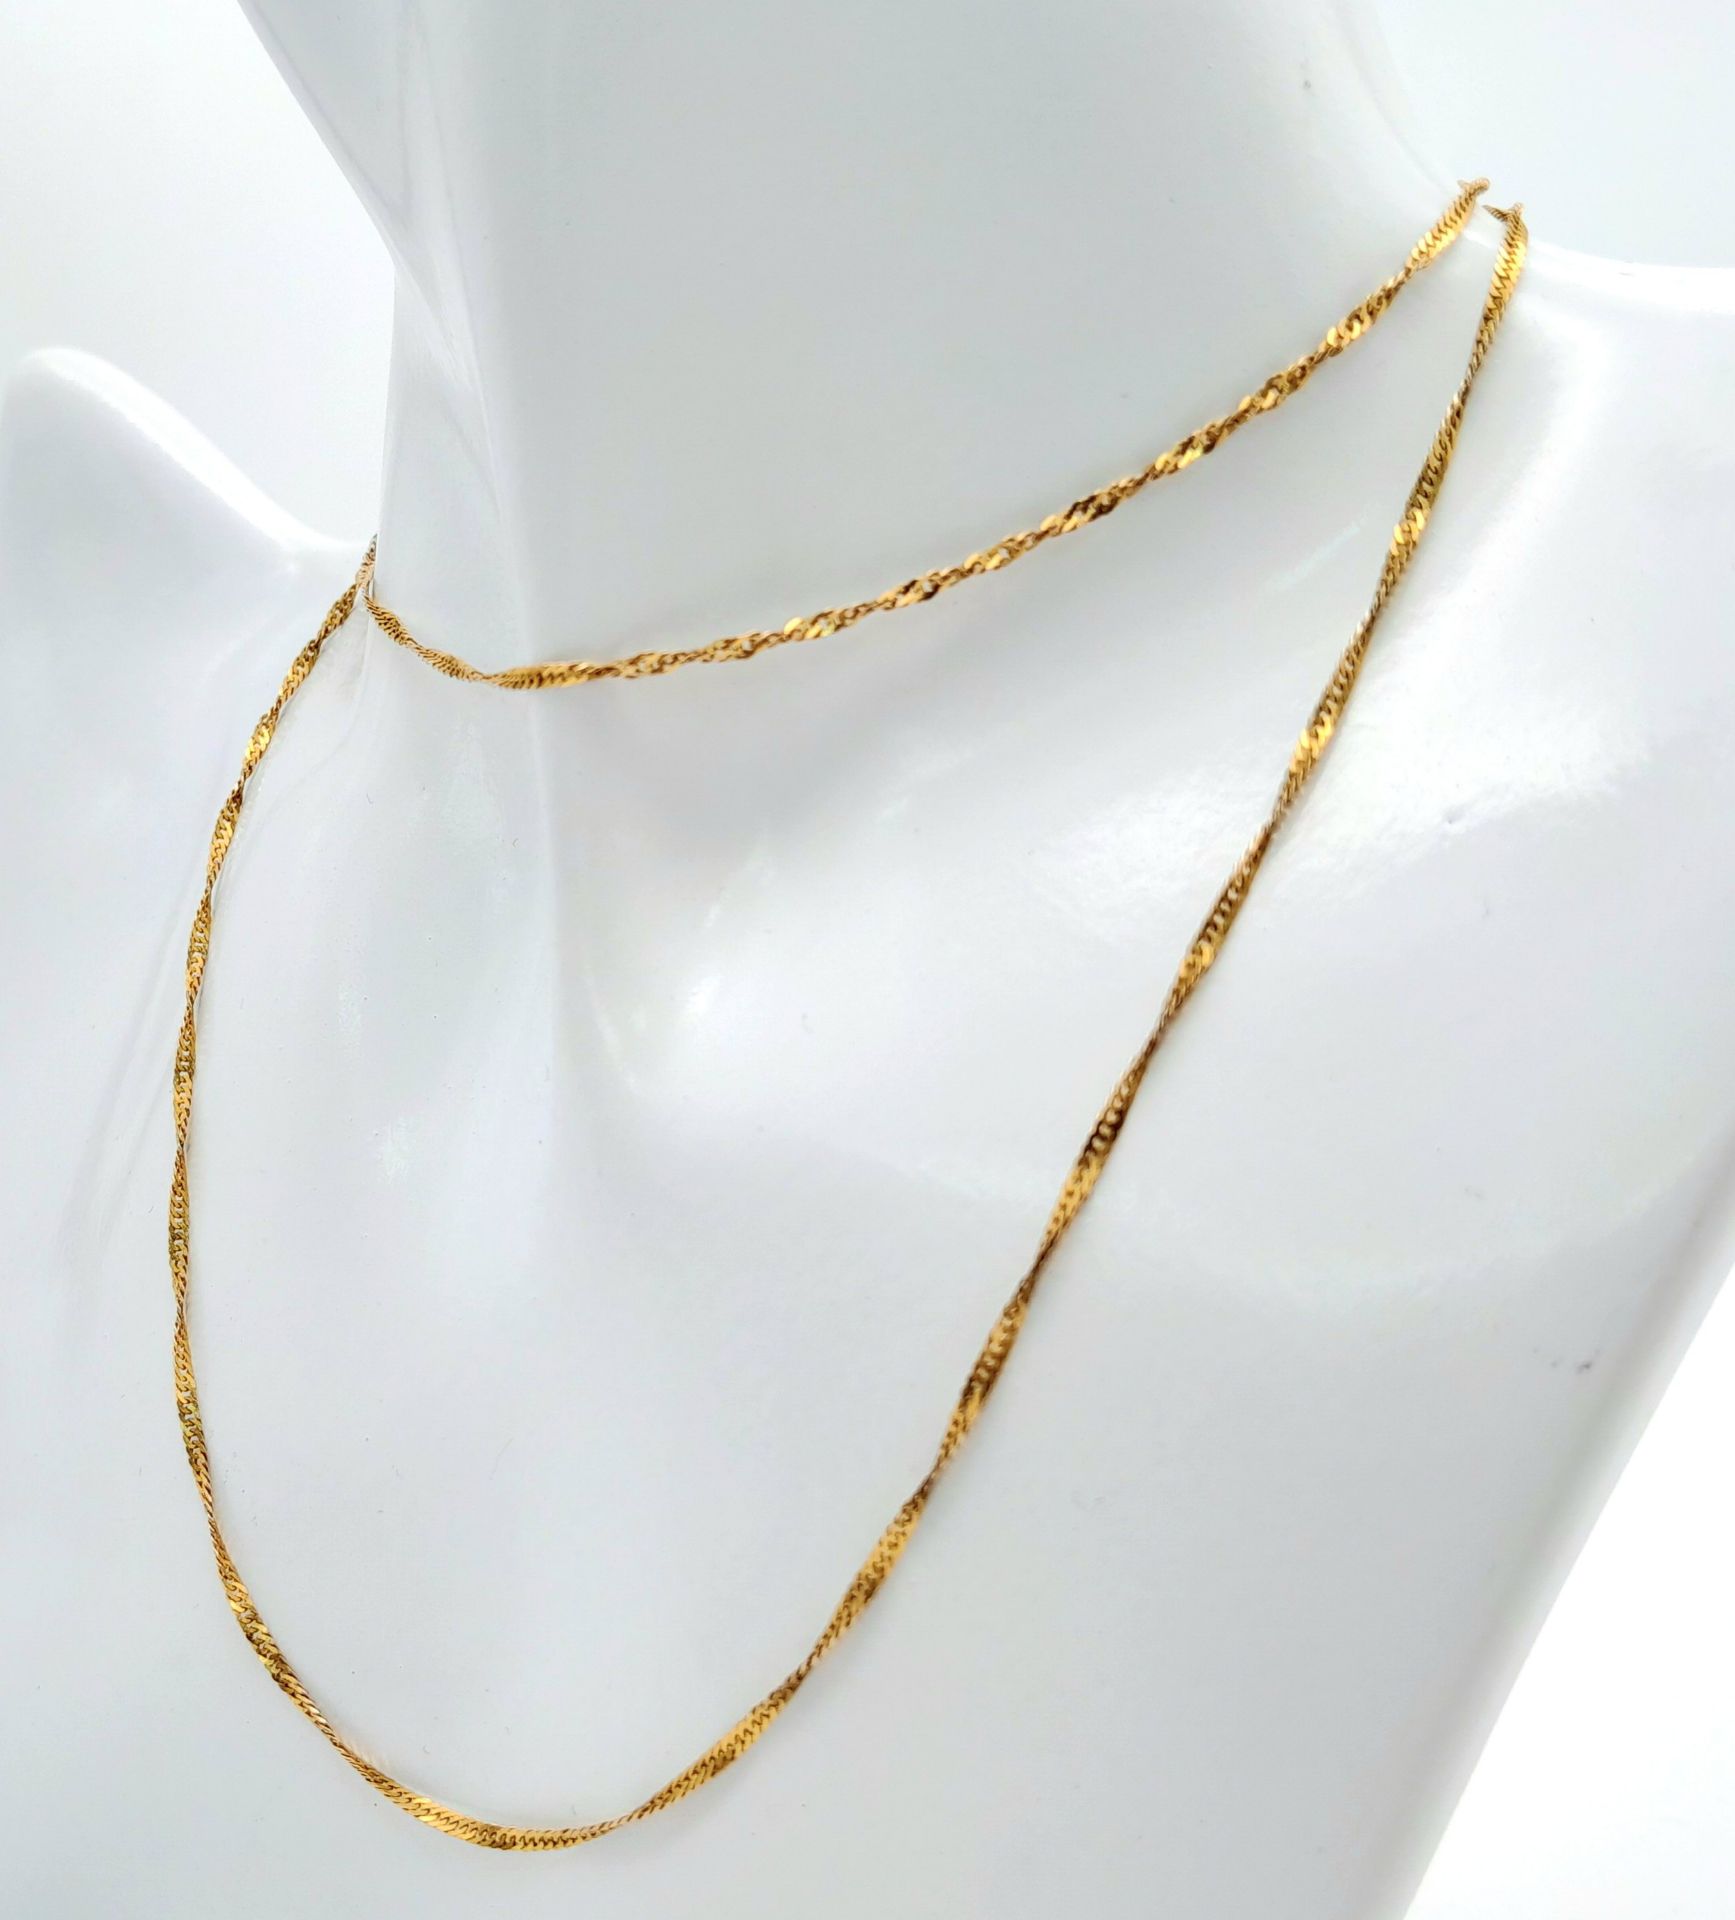 An elegant 9 K yellow gold rope chain necklace, length: 61 cm, weight: 2.3 g. - Image 2 of 11